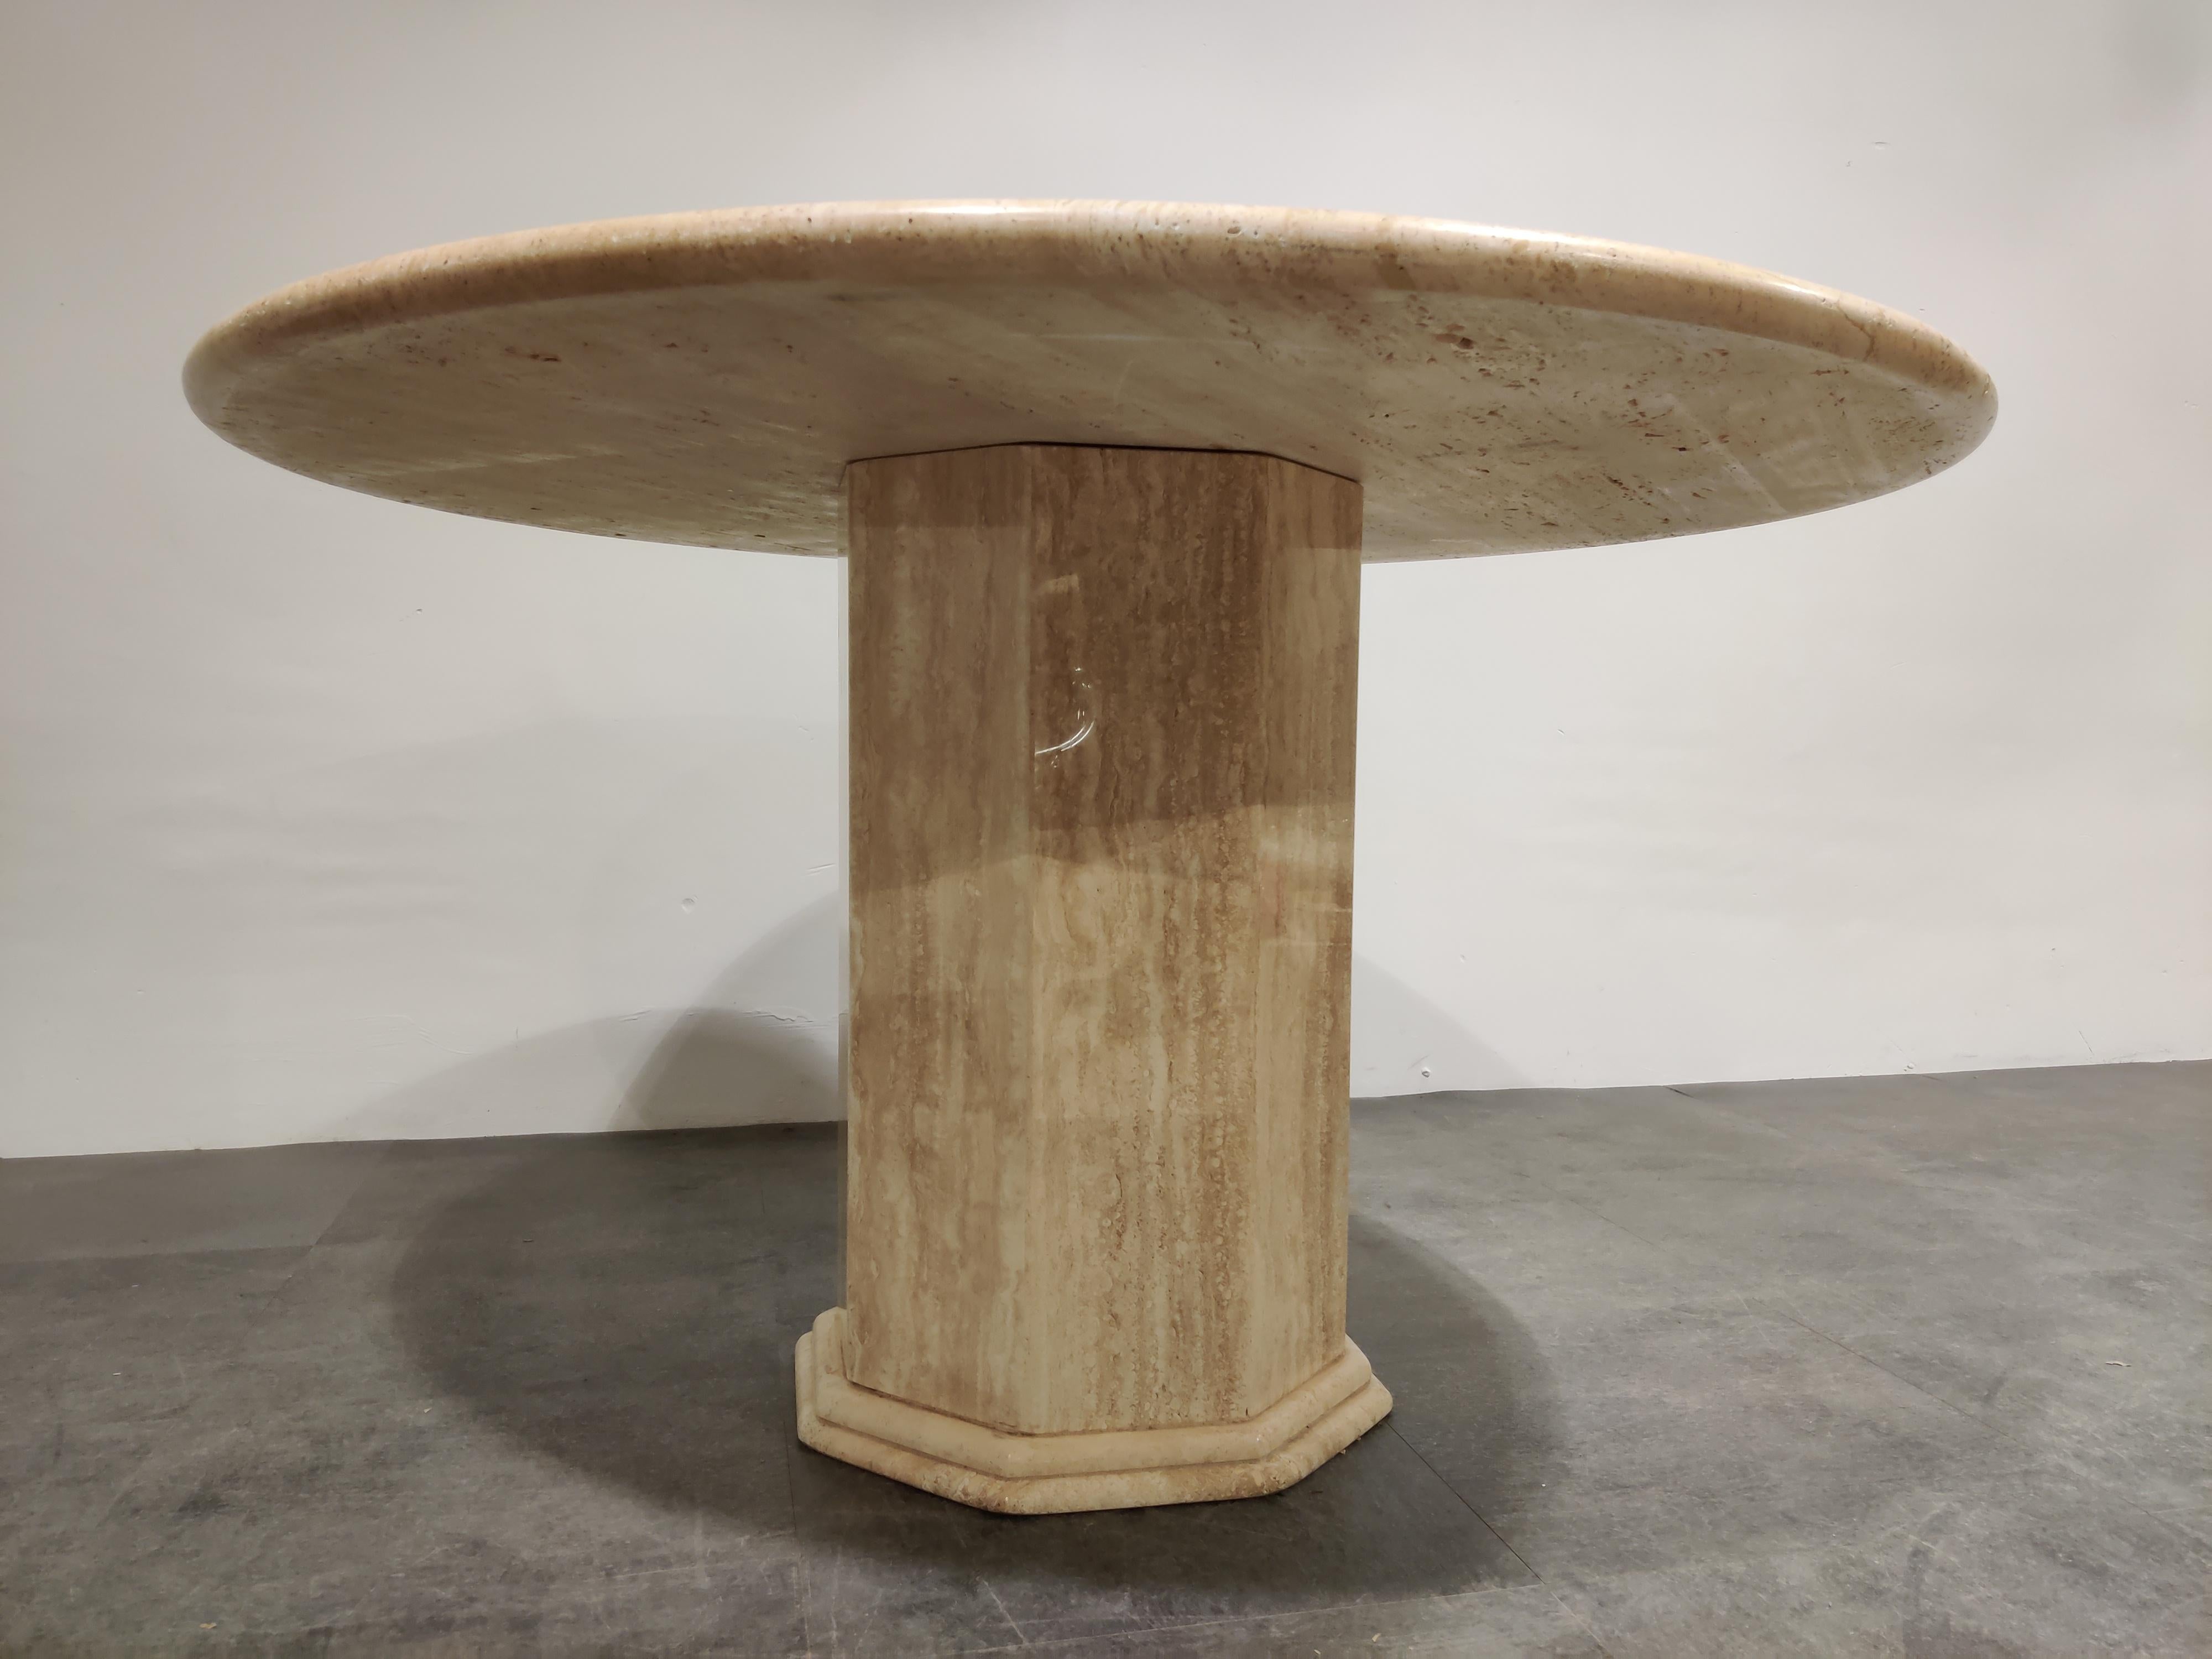 Beautiful dining table made from travertine stone.

Beautiful travertine material with the natural 'holes' in the stone.

Nicely finished round top.

Good condition

1970s, Italy

Measures: Height 74cm/29.13